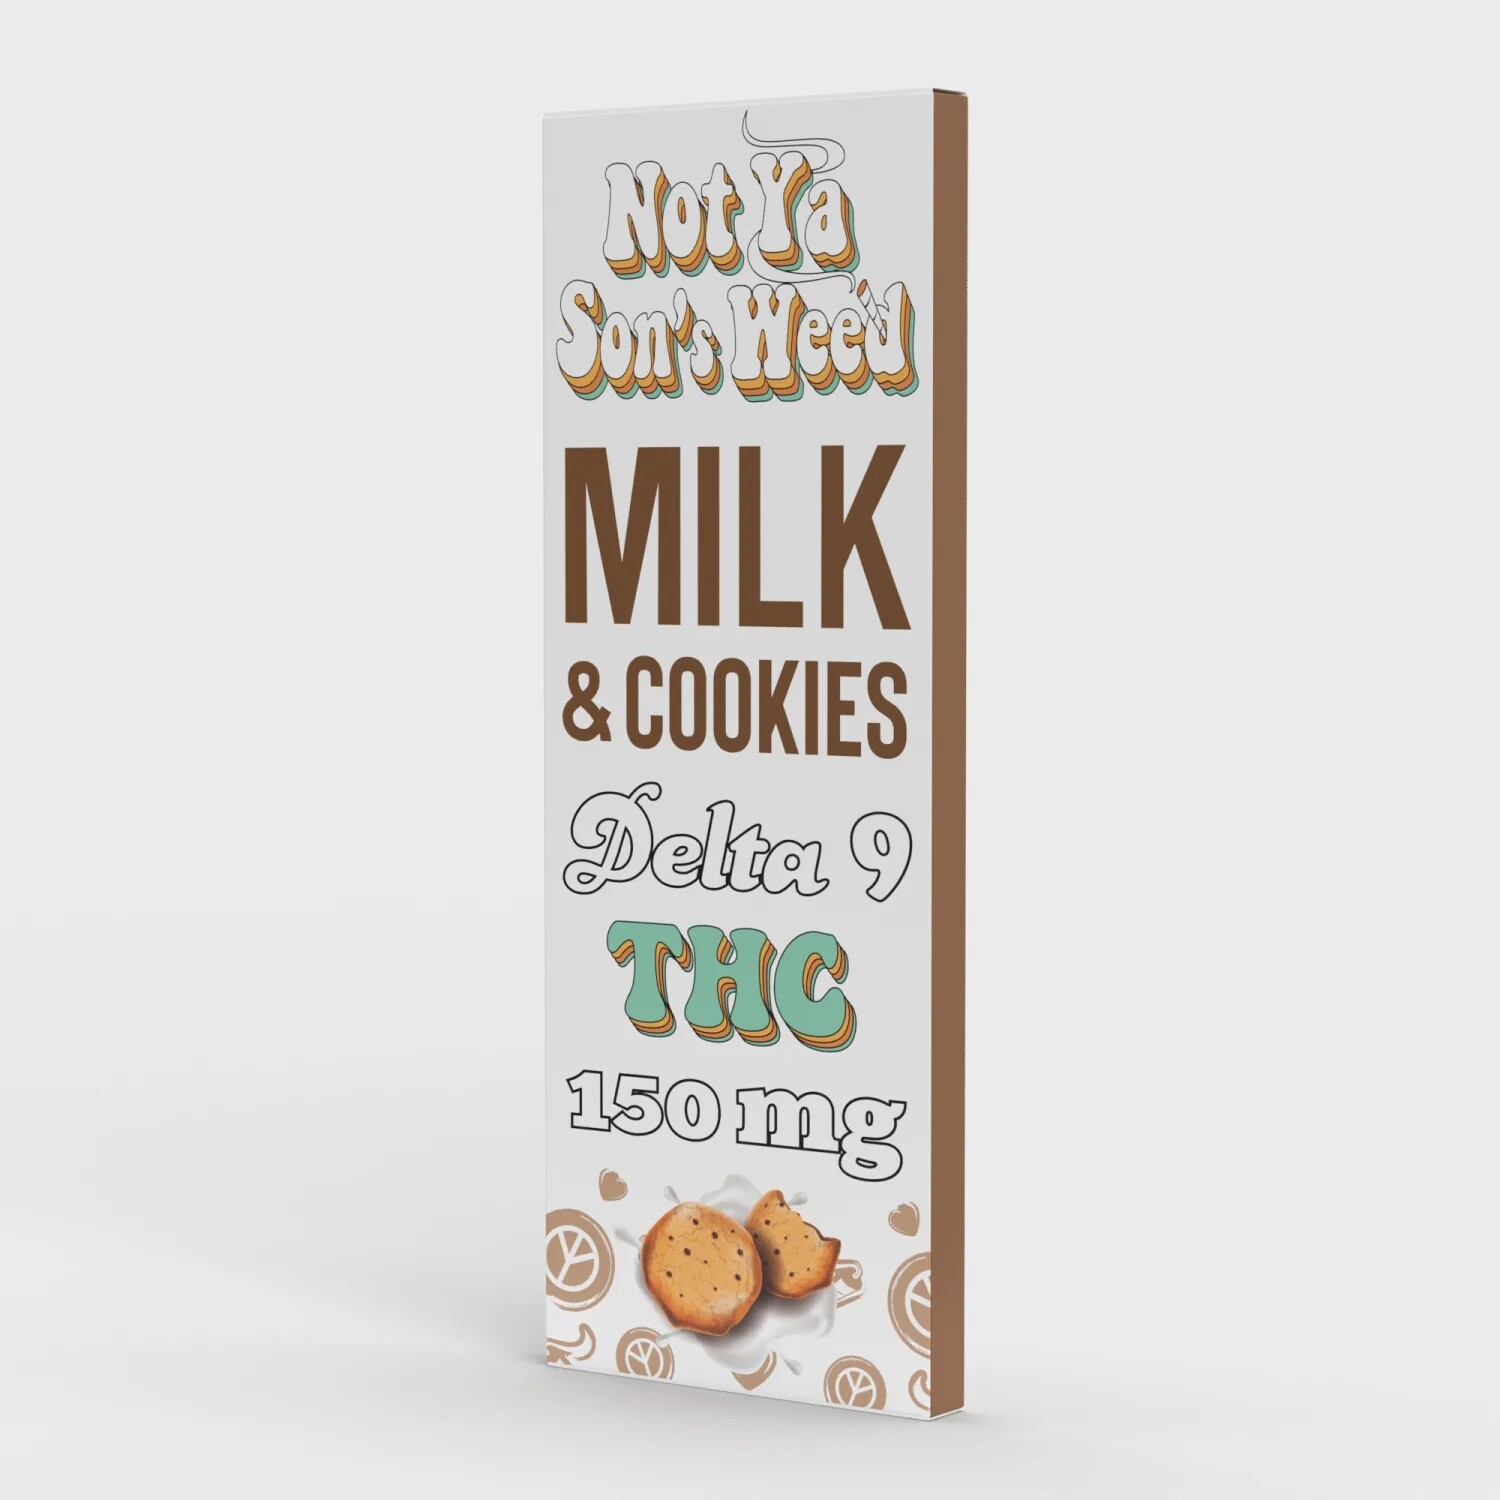 NYSW Delta 9 Milk & Cookies Candy Bar - 150mg